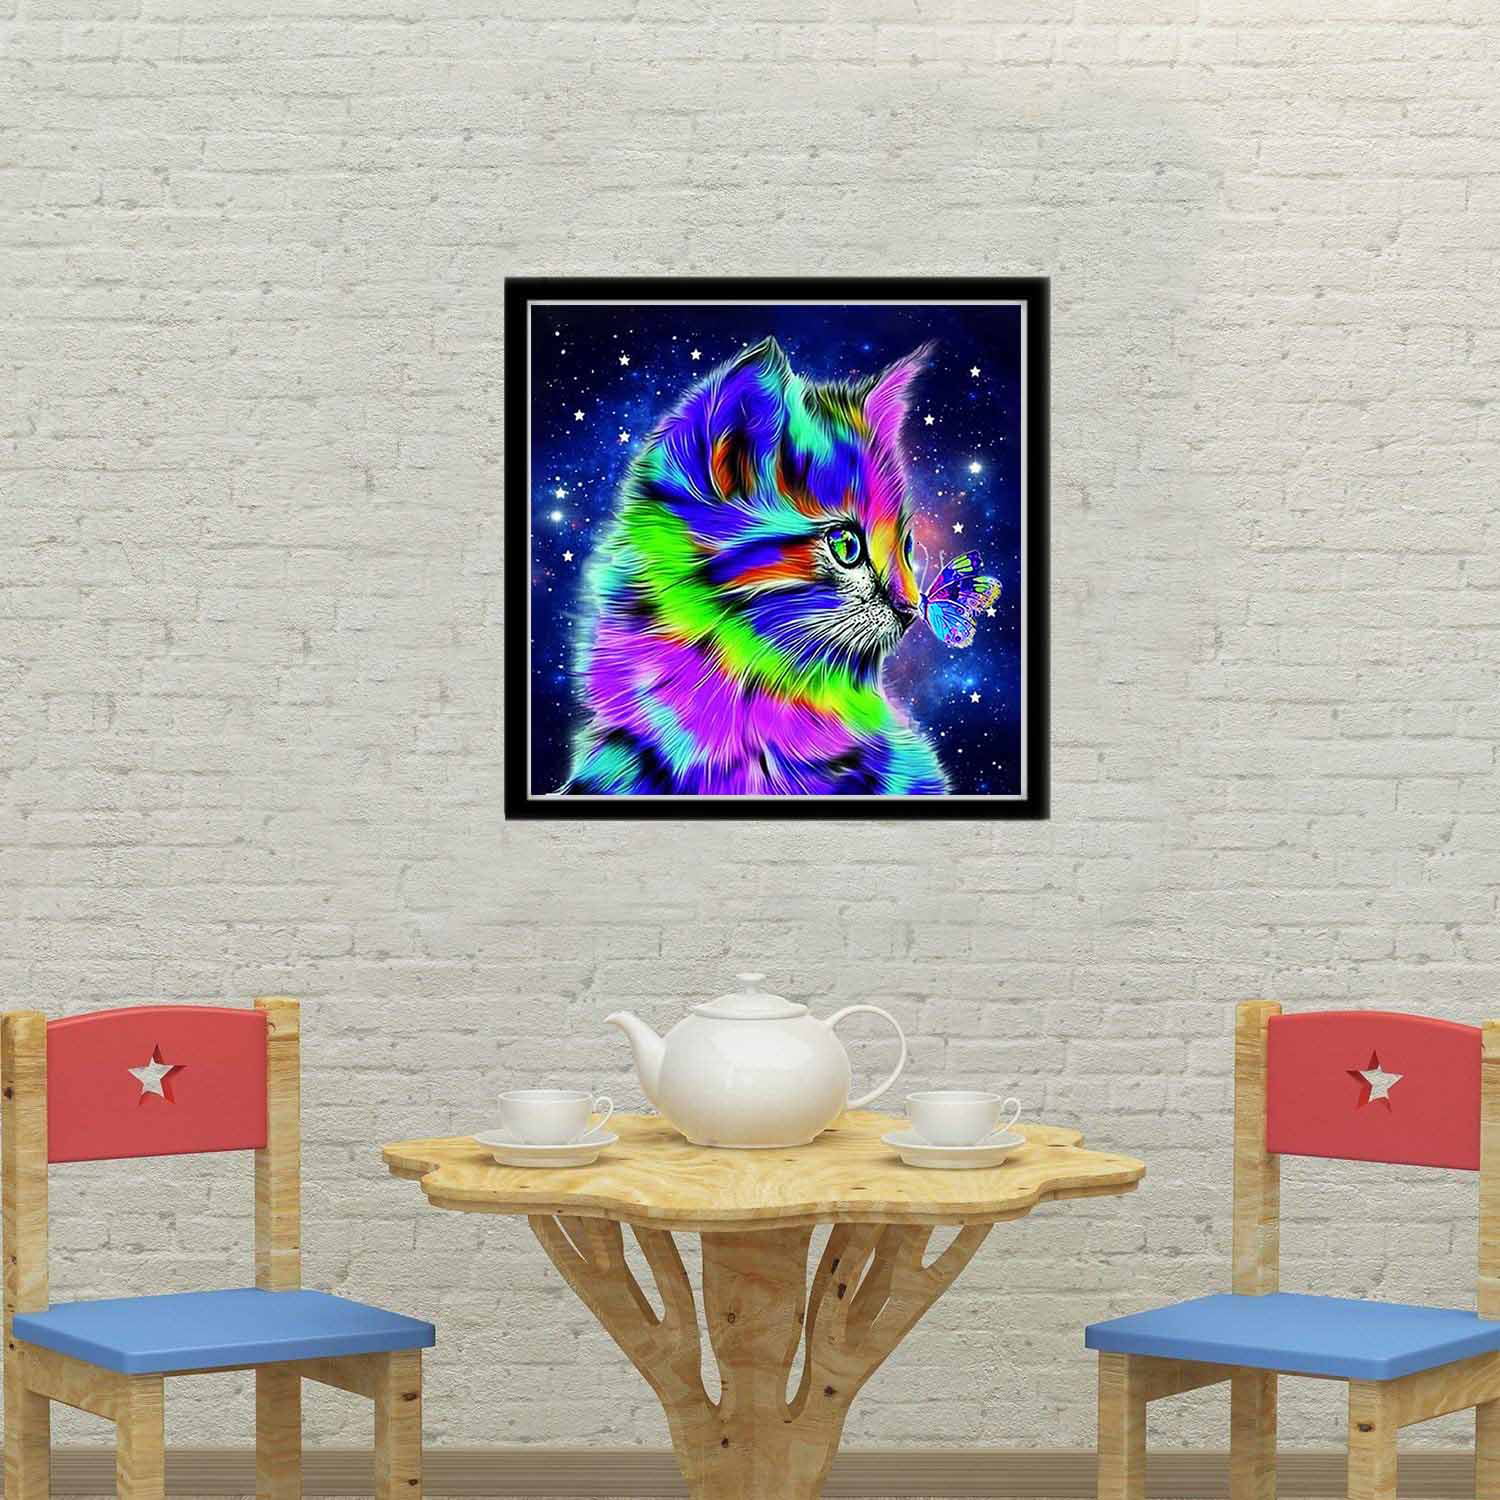 MJiang Cat DIY 5D Diamond Painting Full Kits,DIY Crystal Rhinestone Embroidery Pictures Arts Craft for Home Wall Decor